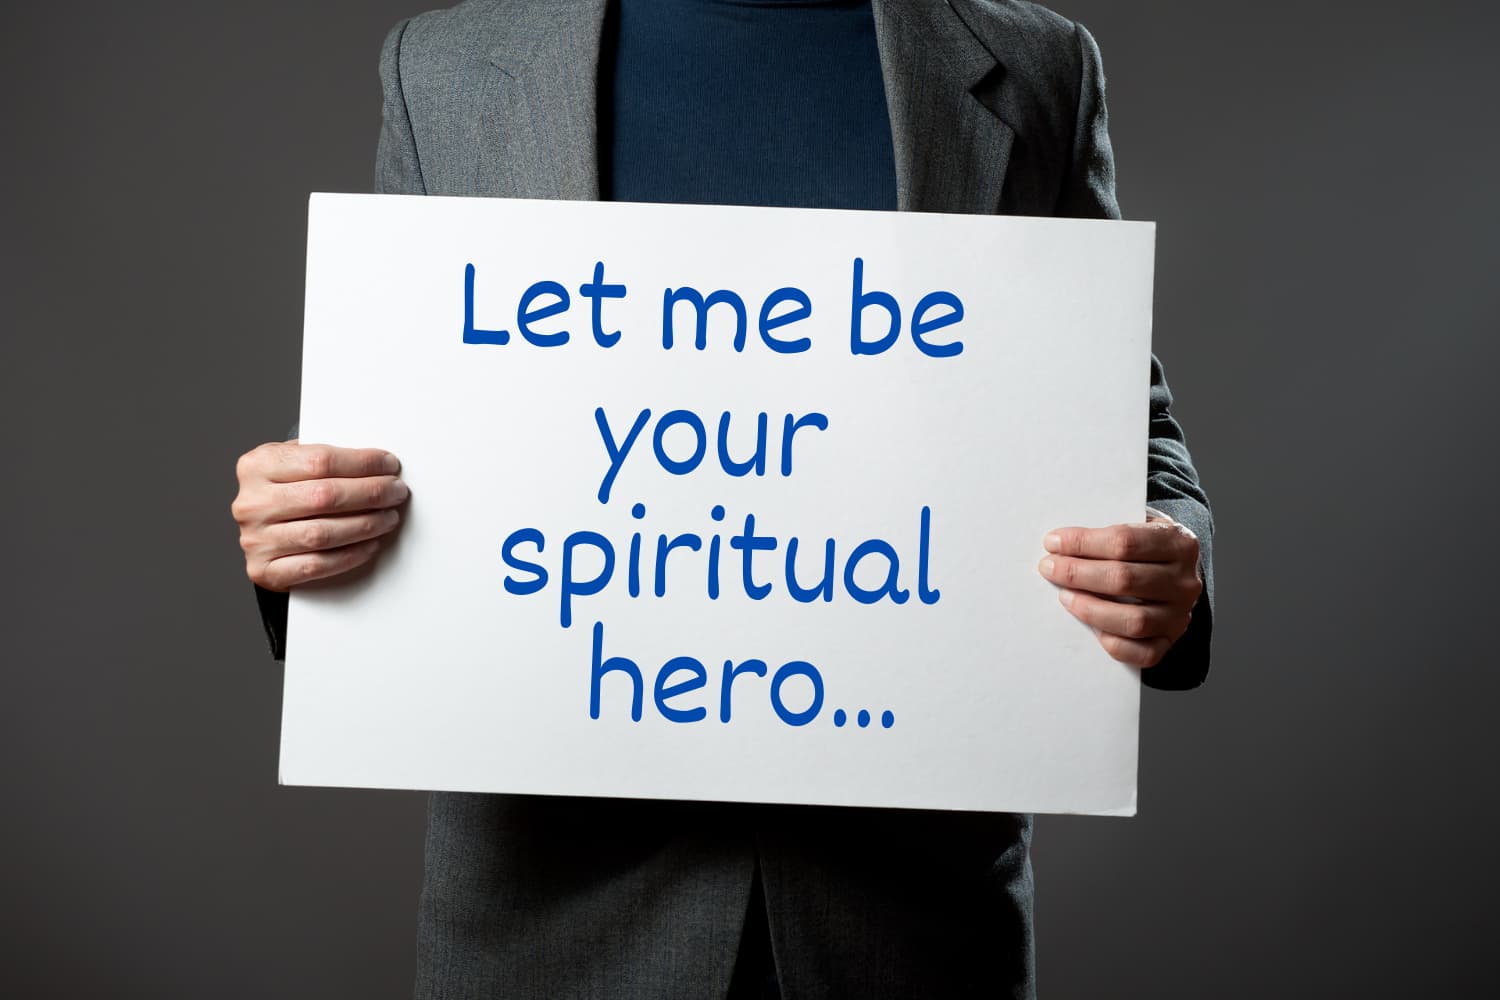 Church pastor holding a sign that says: "Let me be your spiritual hero..."